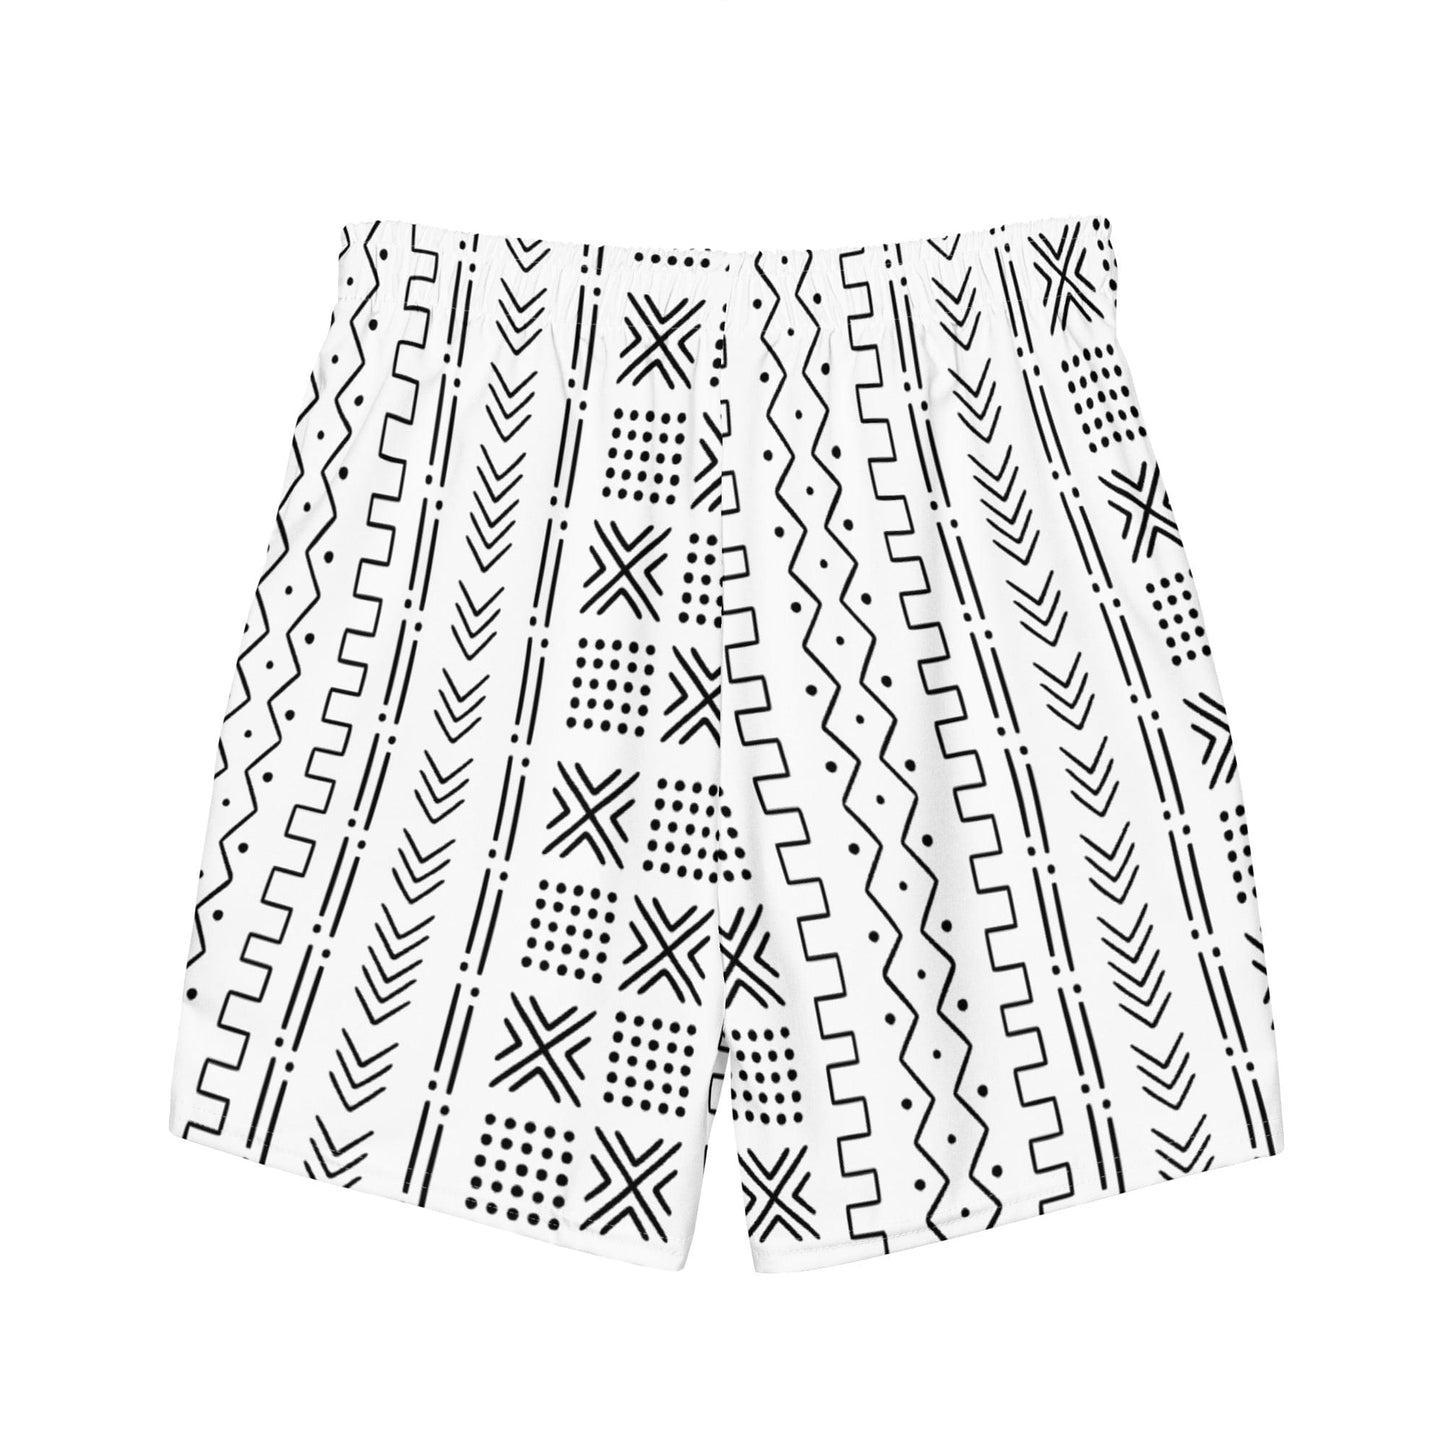 African Mud Cloth Recycled Men's Swim Trunks - The Global Wanderer